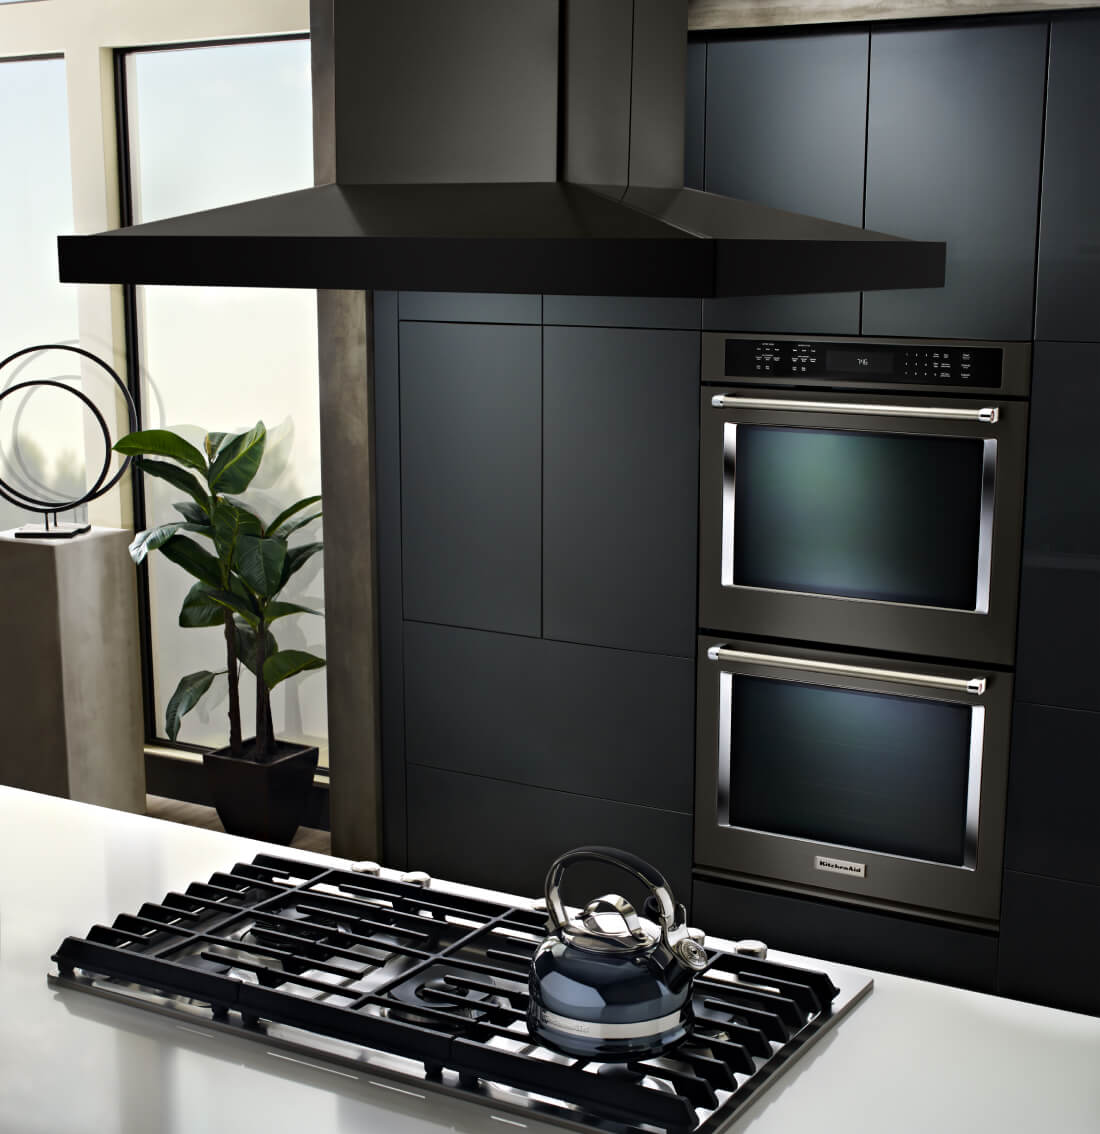 Black island canopy hood over a gas cooktop